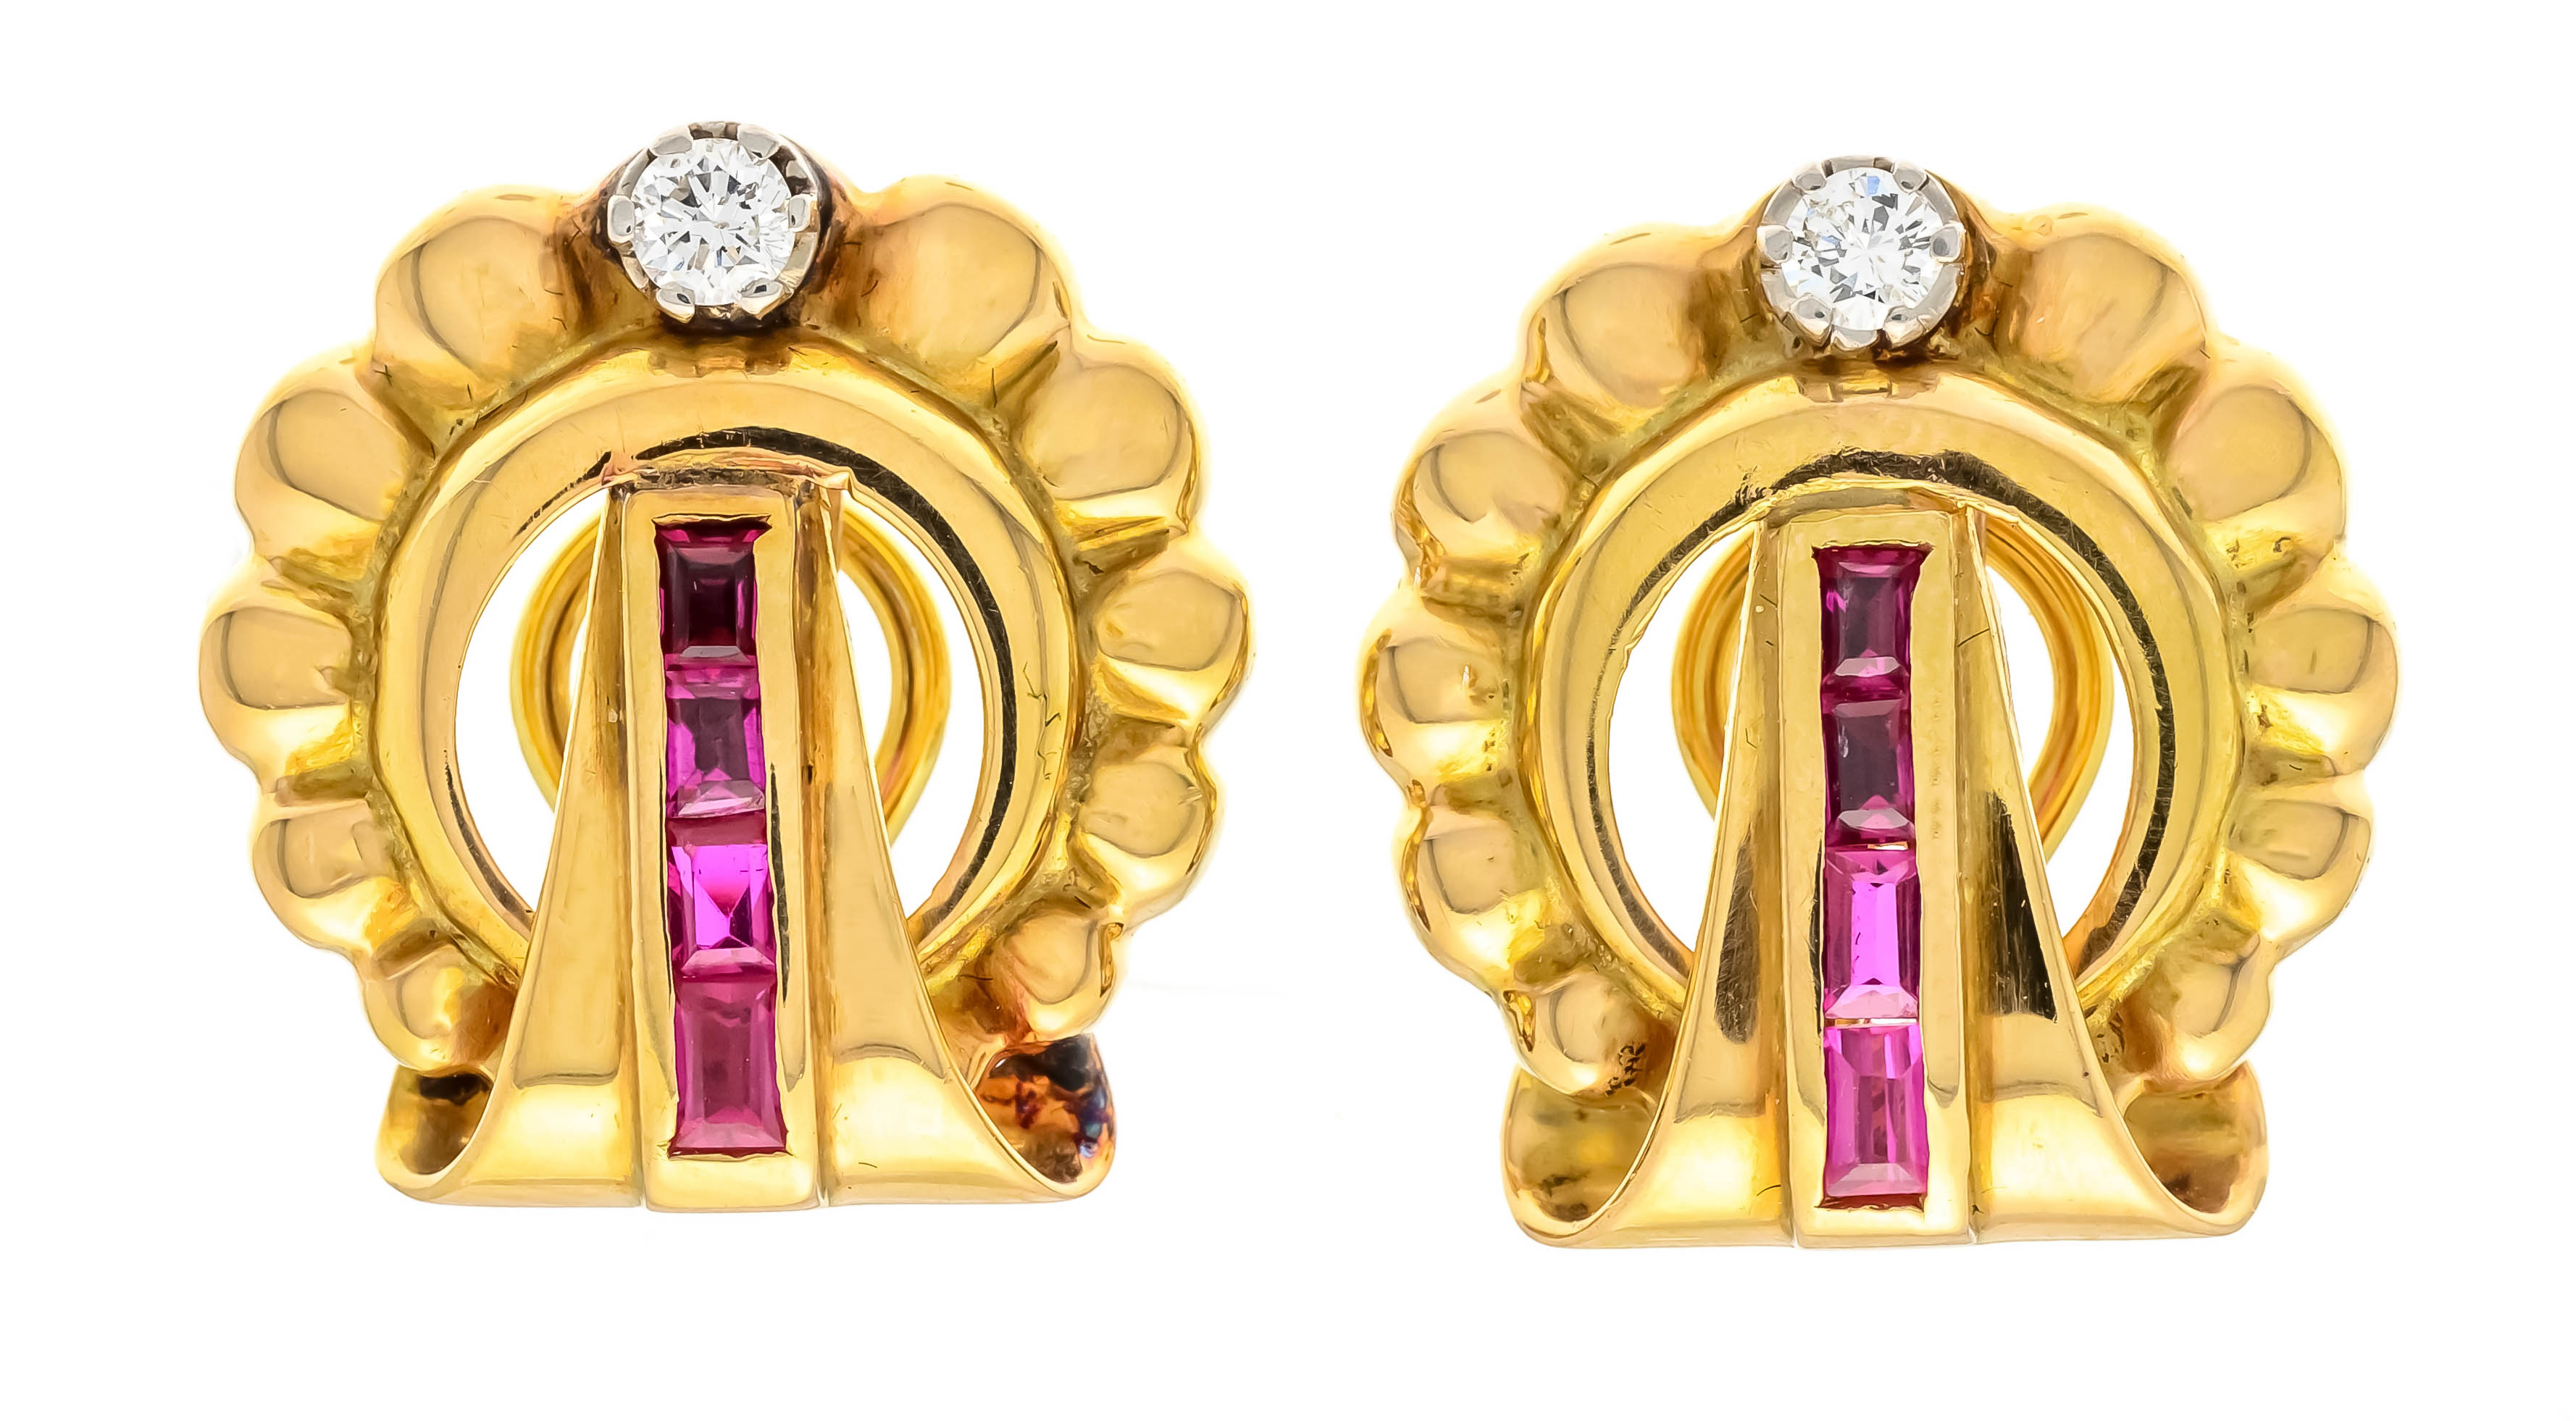 Brilliant ruby earclips GG/WG 585/000 with 4 matching cut 3 x 1.4 mm and 2 brilliant-cut diamonds,